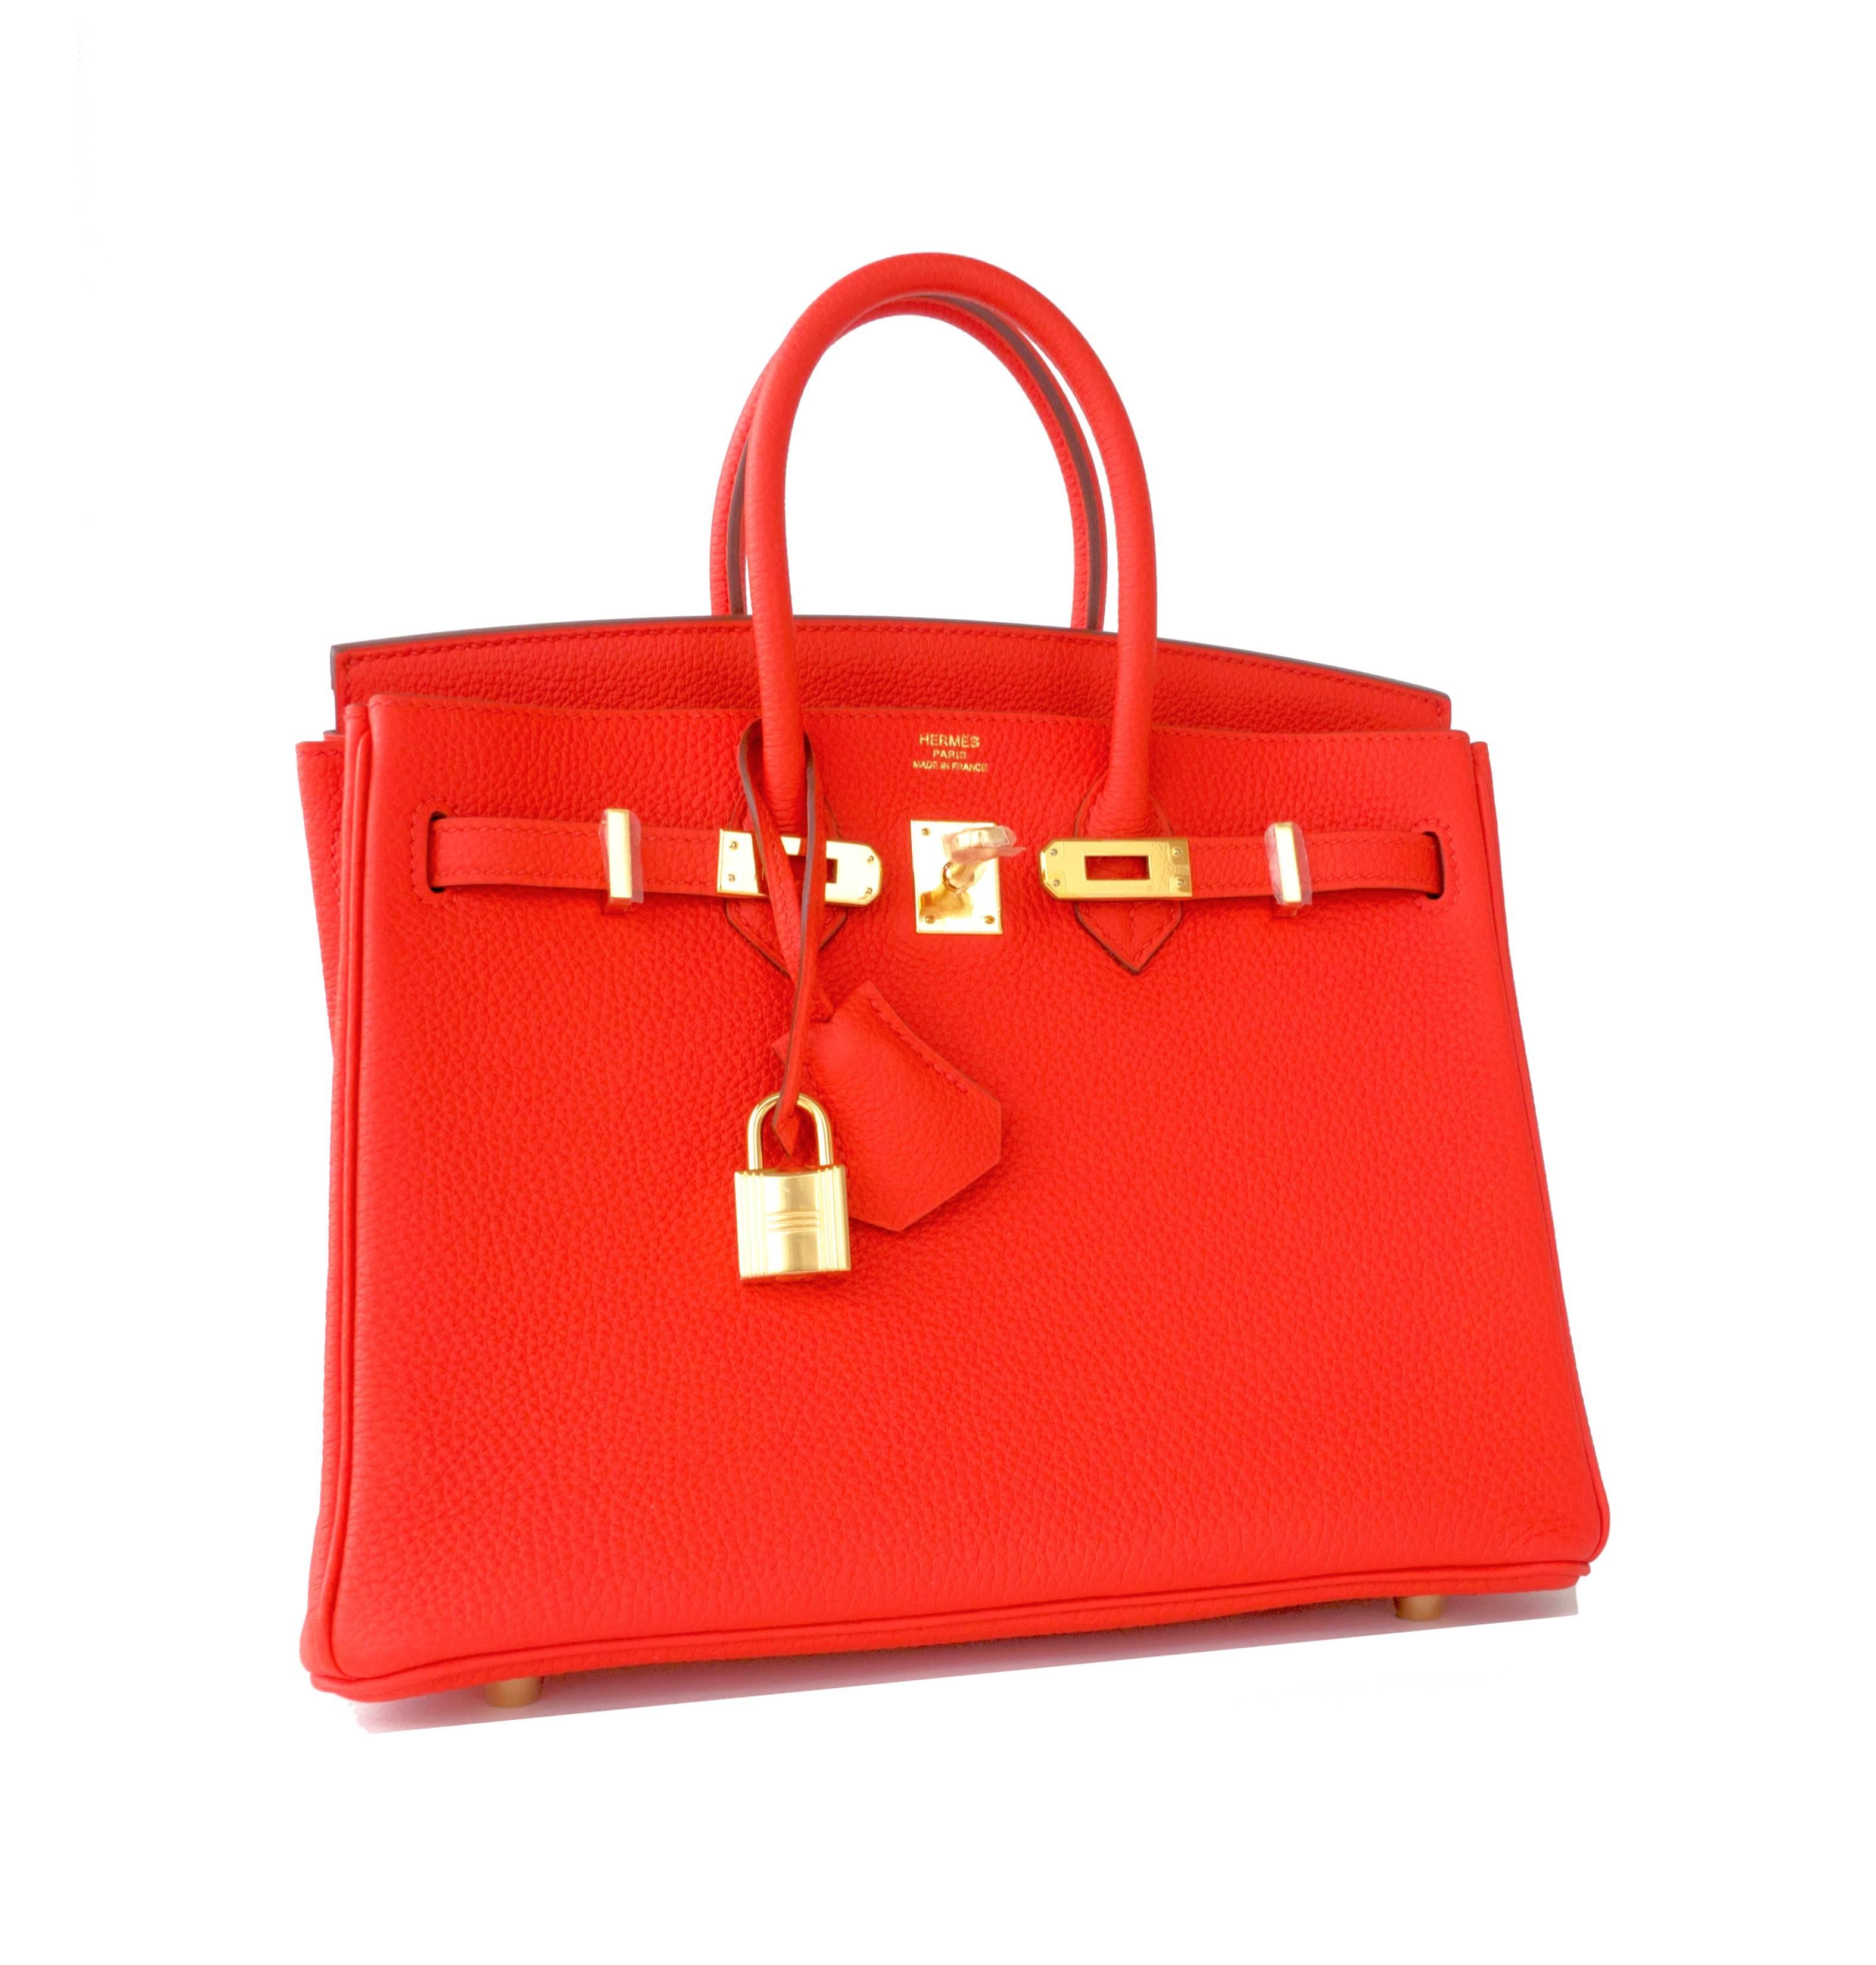 Hermes Capucine Baby Birkin Red Orange 25cm Togo Gold Hardware Darling
Store fresh.  Brand New and Never Carried (plastic on hardware). 
Perfect gift!  Comes full set with keys, lock, clochette, a sleeper for the bag, rain protector, ribbon and